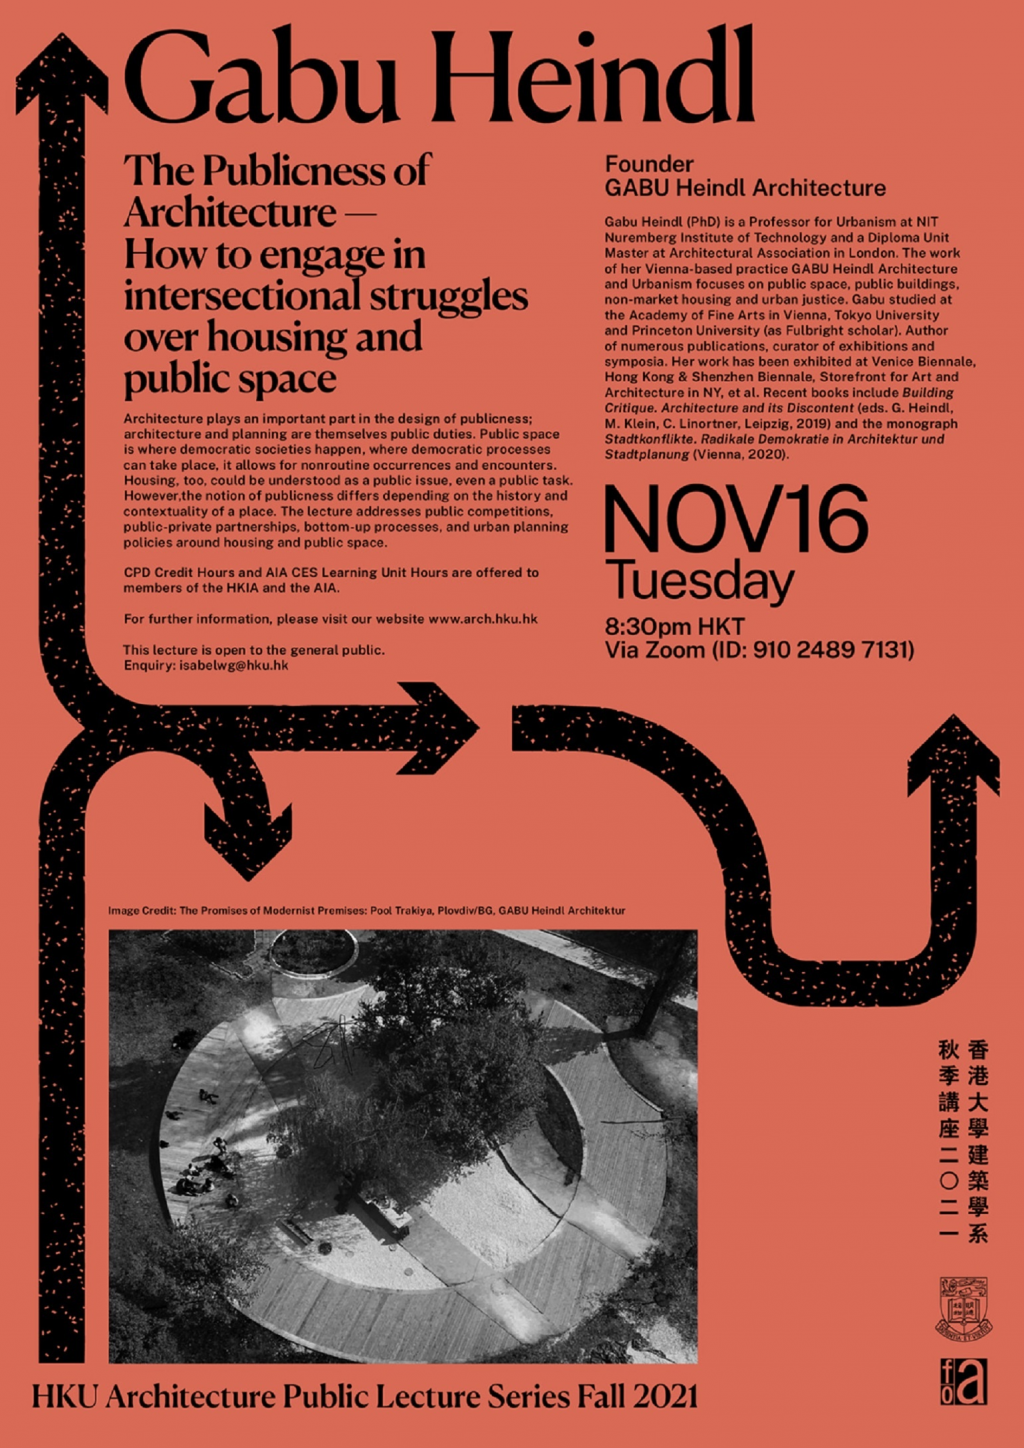 âThe Publicness of Architecture â How to engage in intersectional struggles over housing and public spaceâ by Gabu Heindl | 16 November